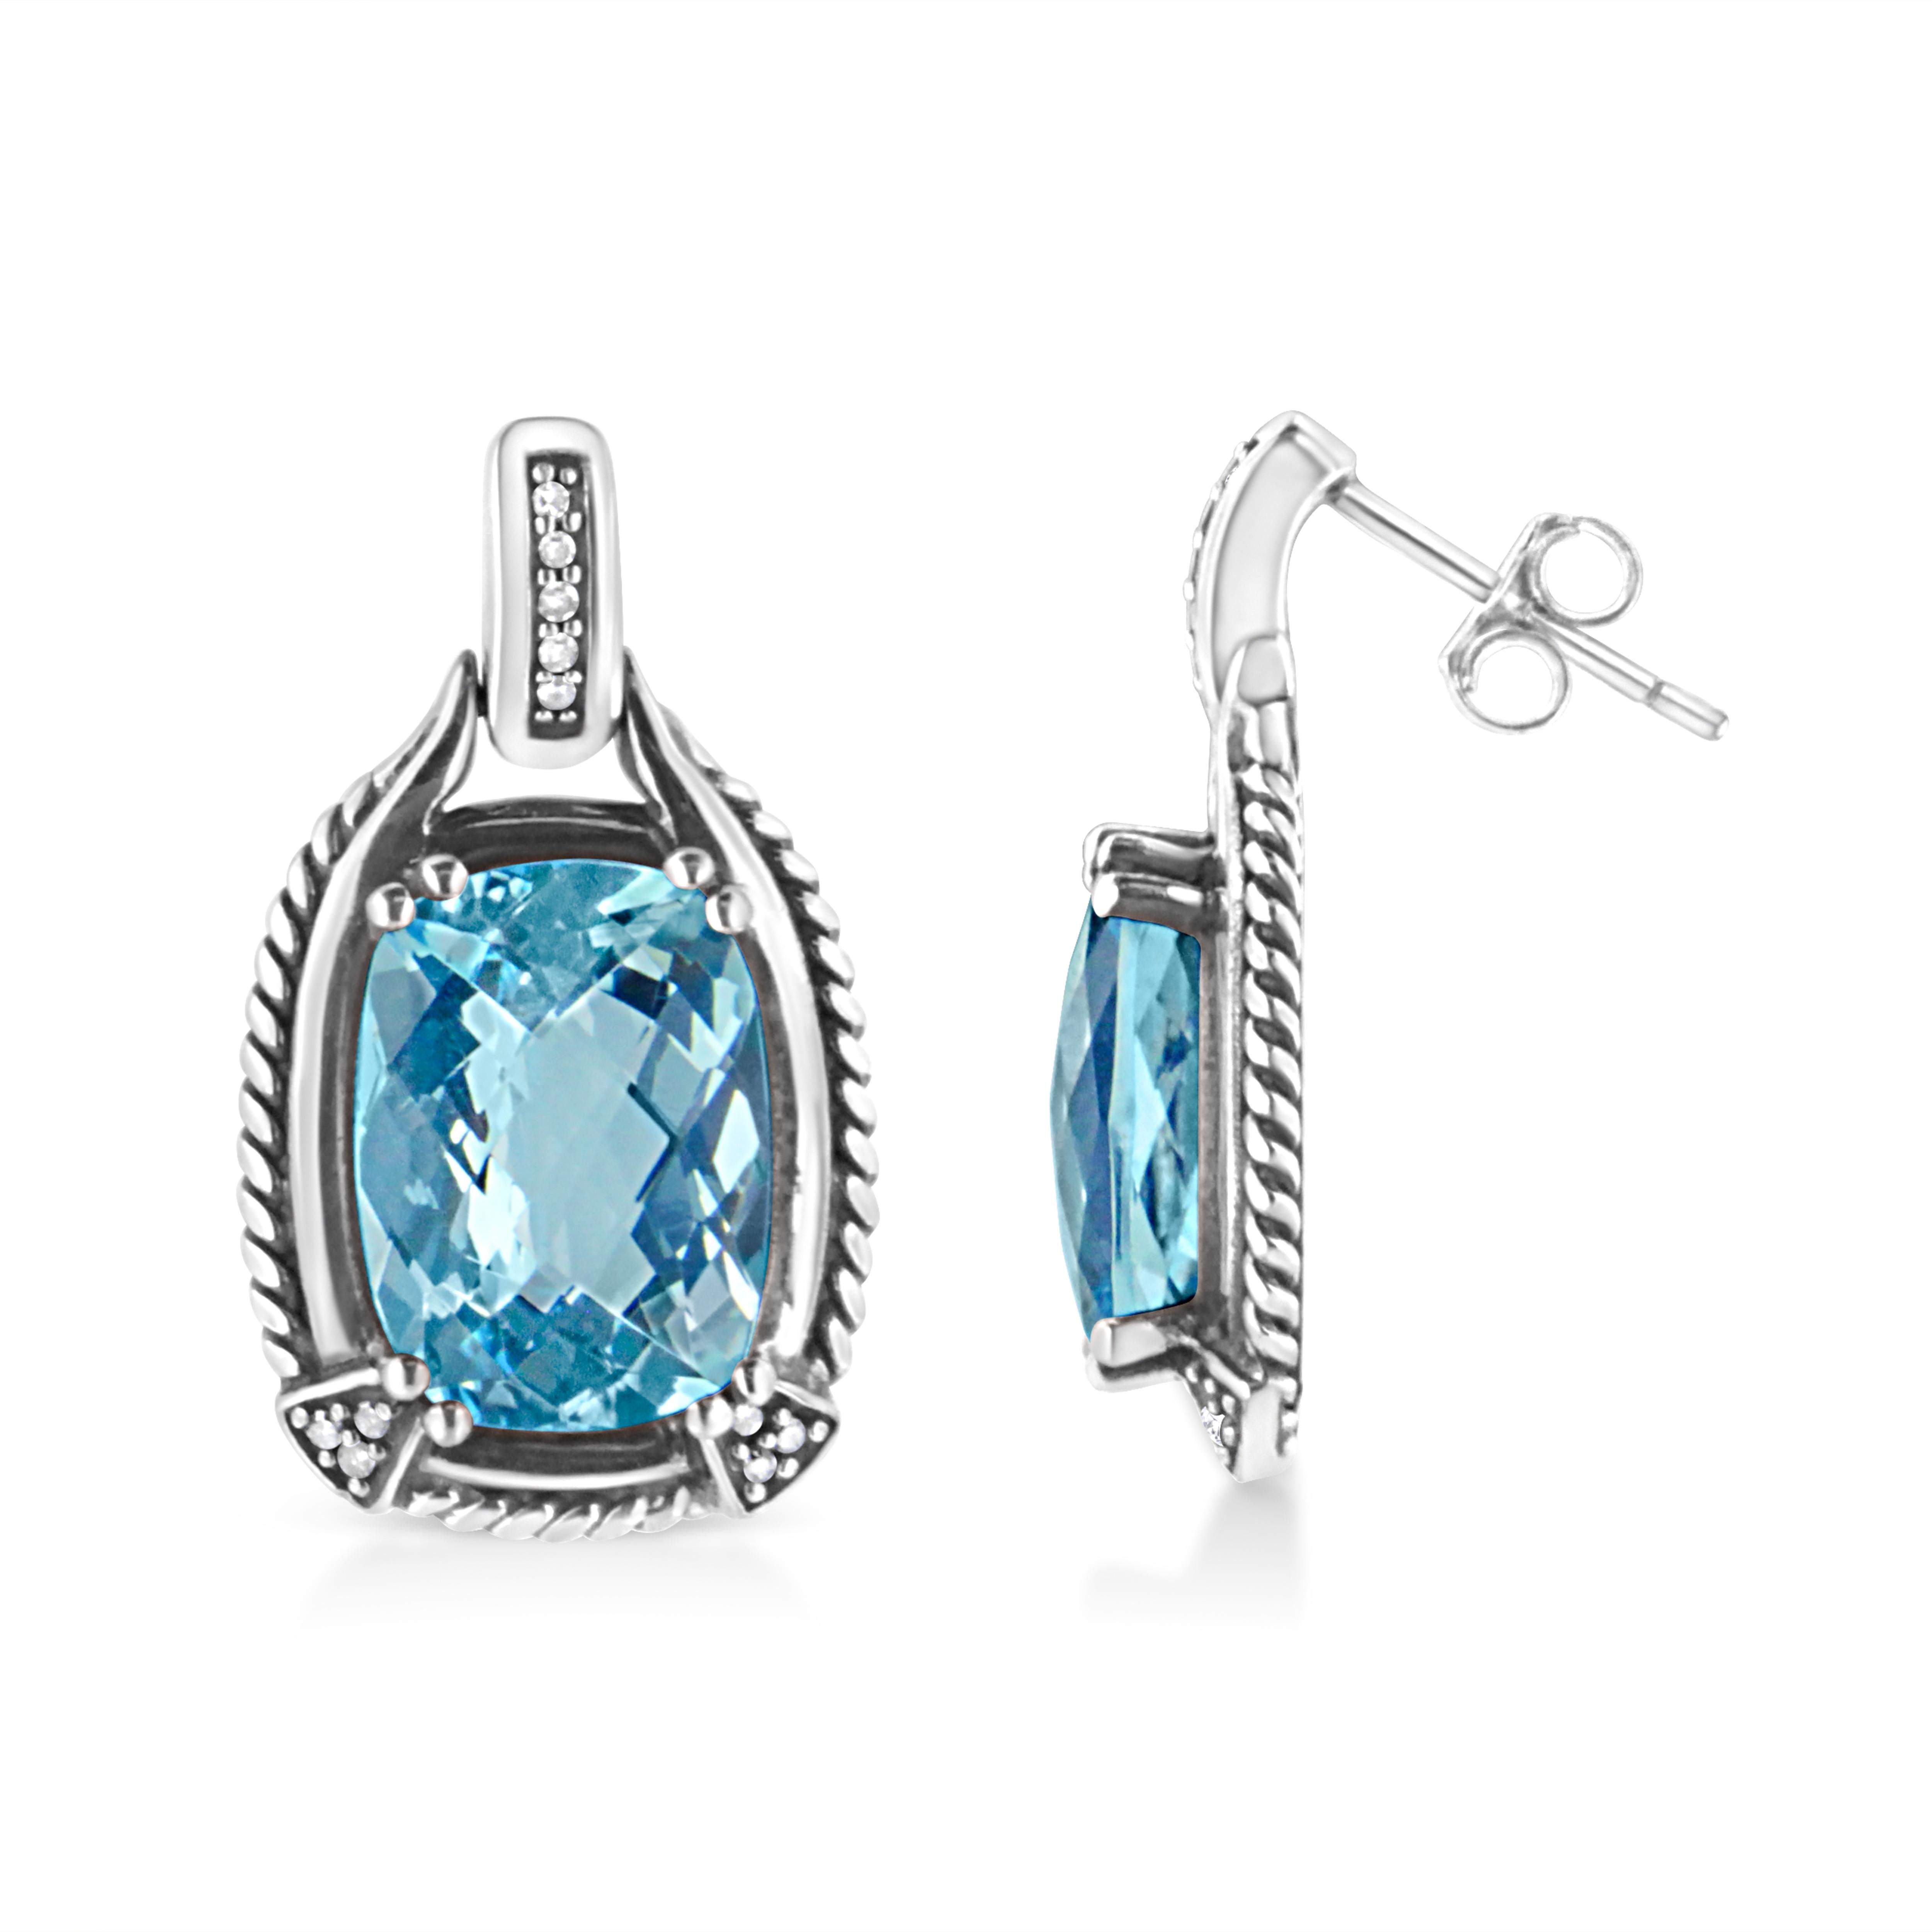 These mesmeric blue topaz and diamond earrings is a sweet illumination for her ears. Styled in luminous sterling silver these ravishing earrings is jeweled with a large cushion cut blue topaz. Accenting its vibrant, 22 sparkling single cut diamonds